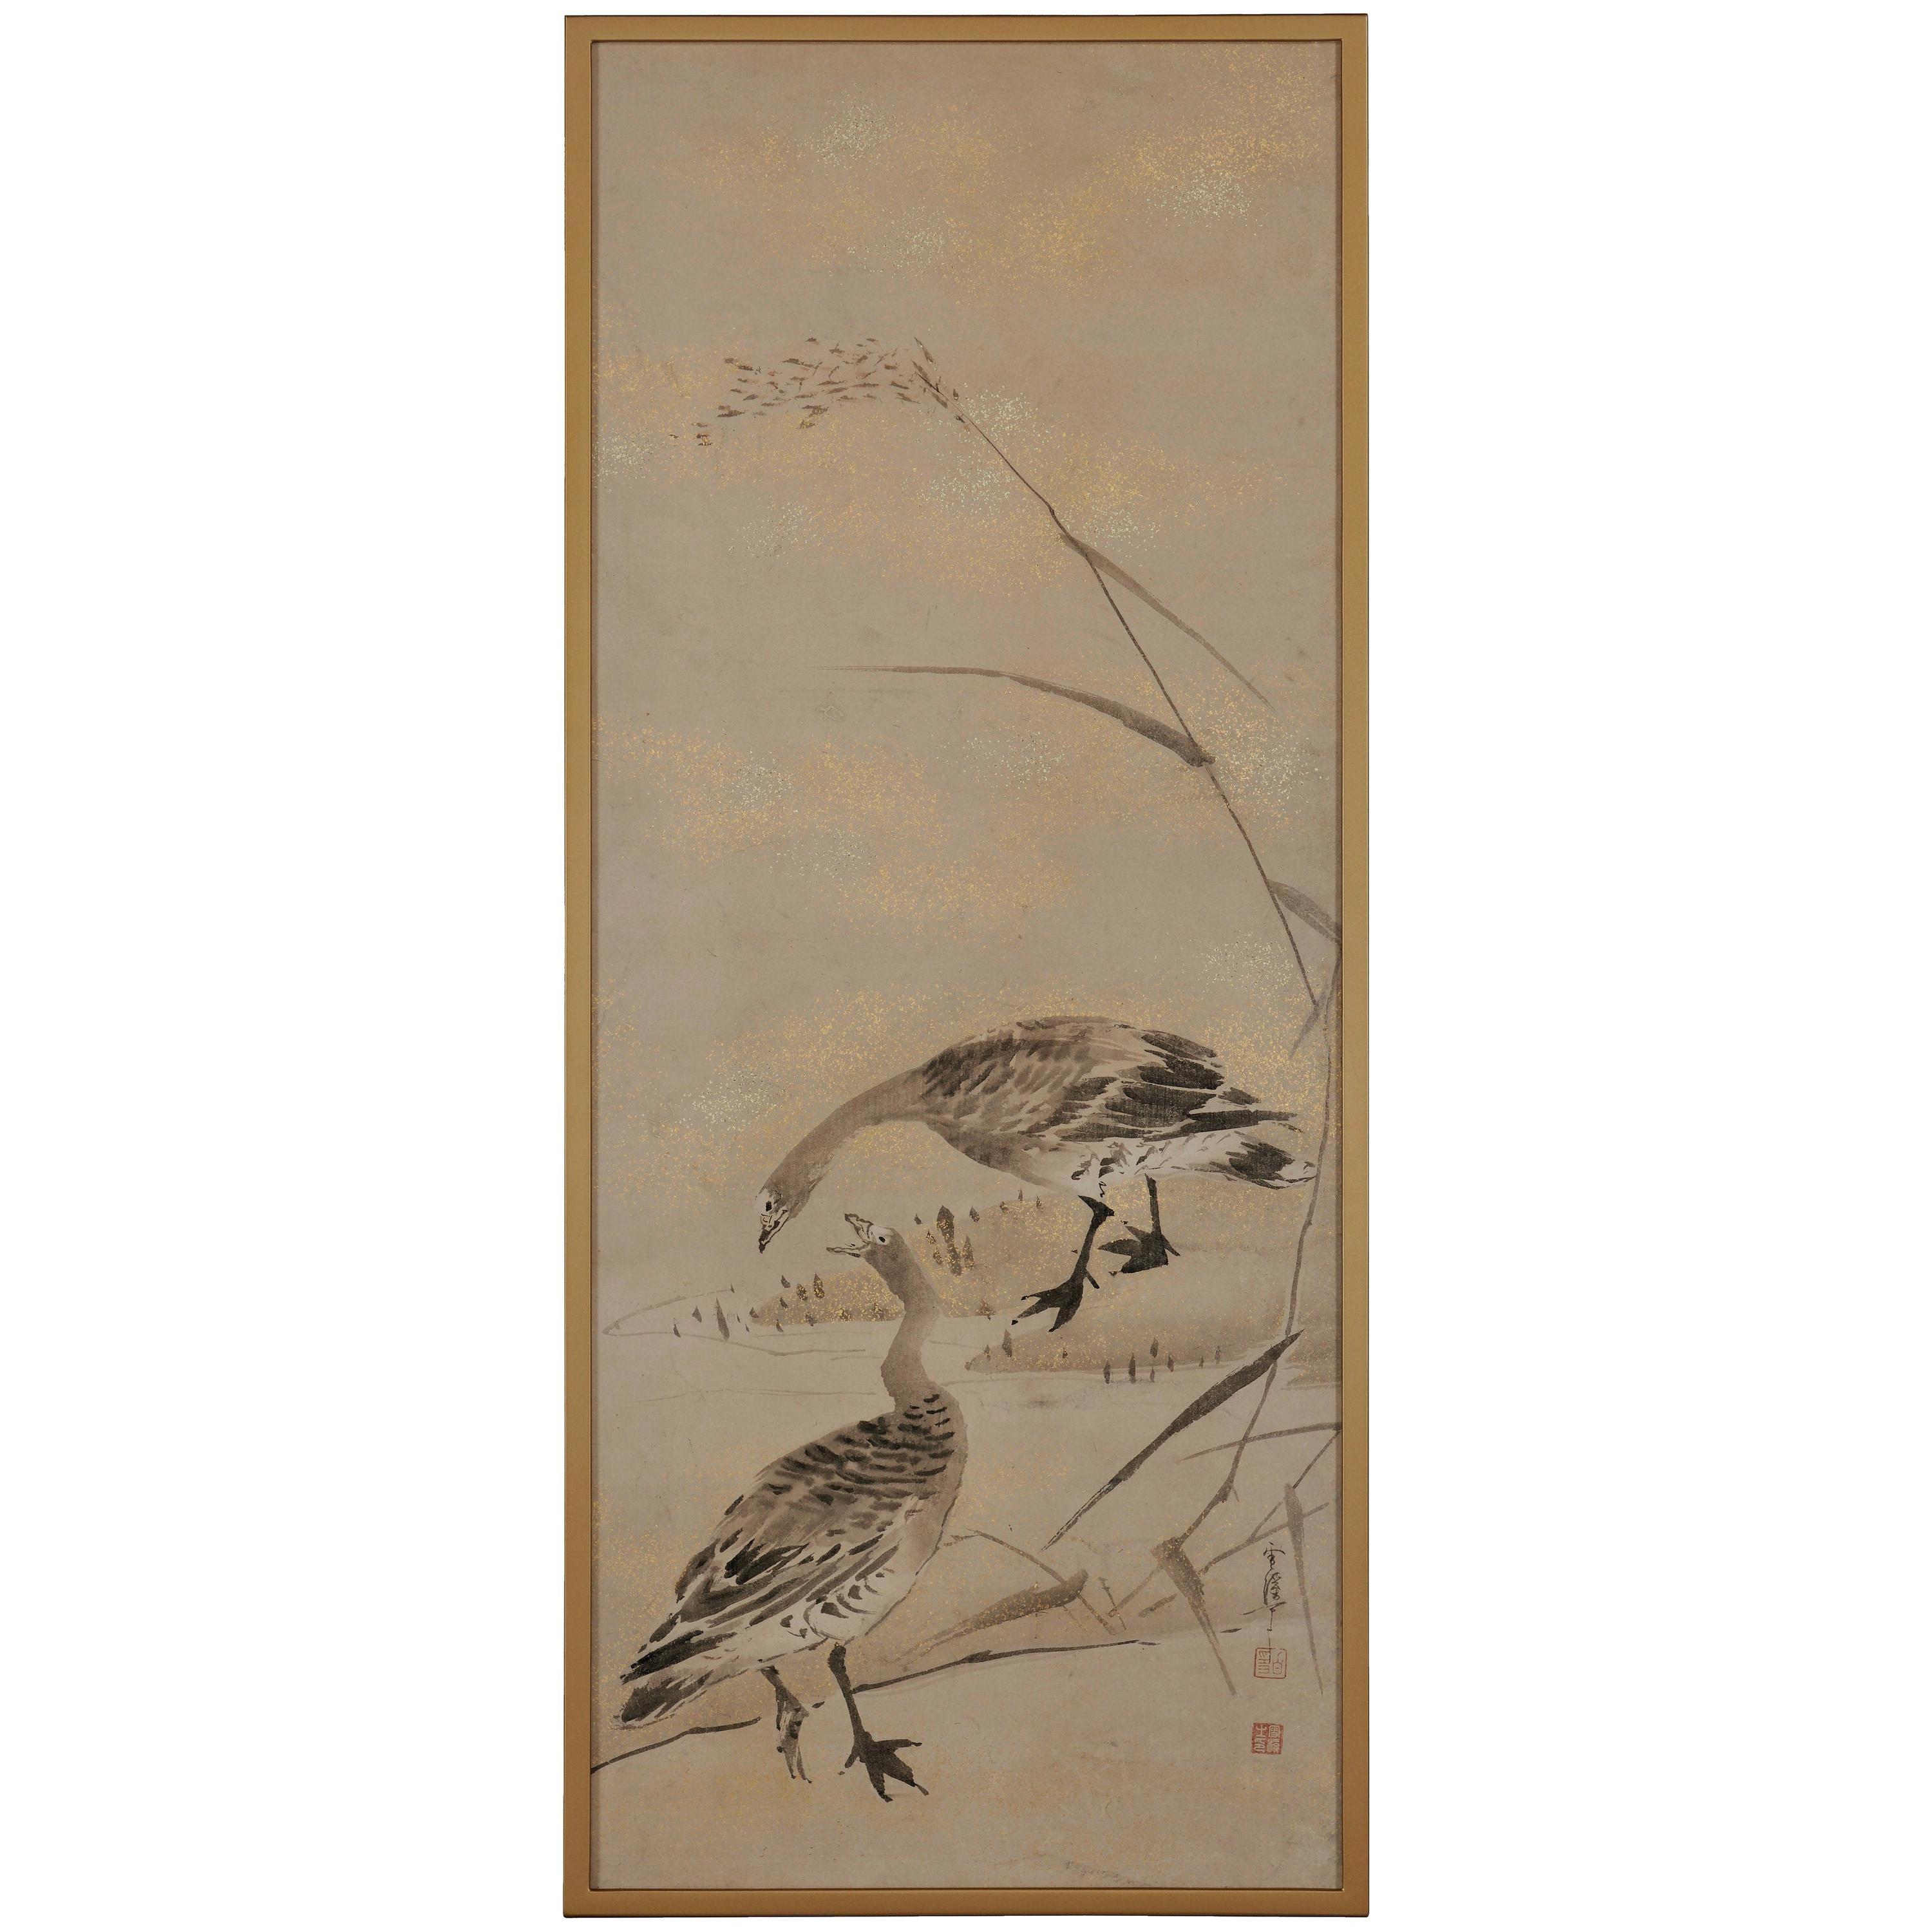 Japanese Painting, Framed, 17th-18th Century, Geese & Reeds by Yamaguchi Sekkei